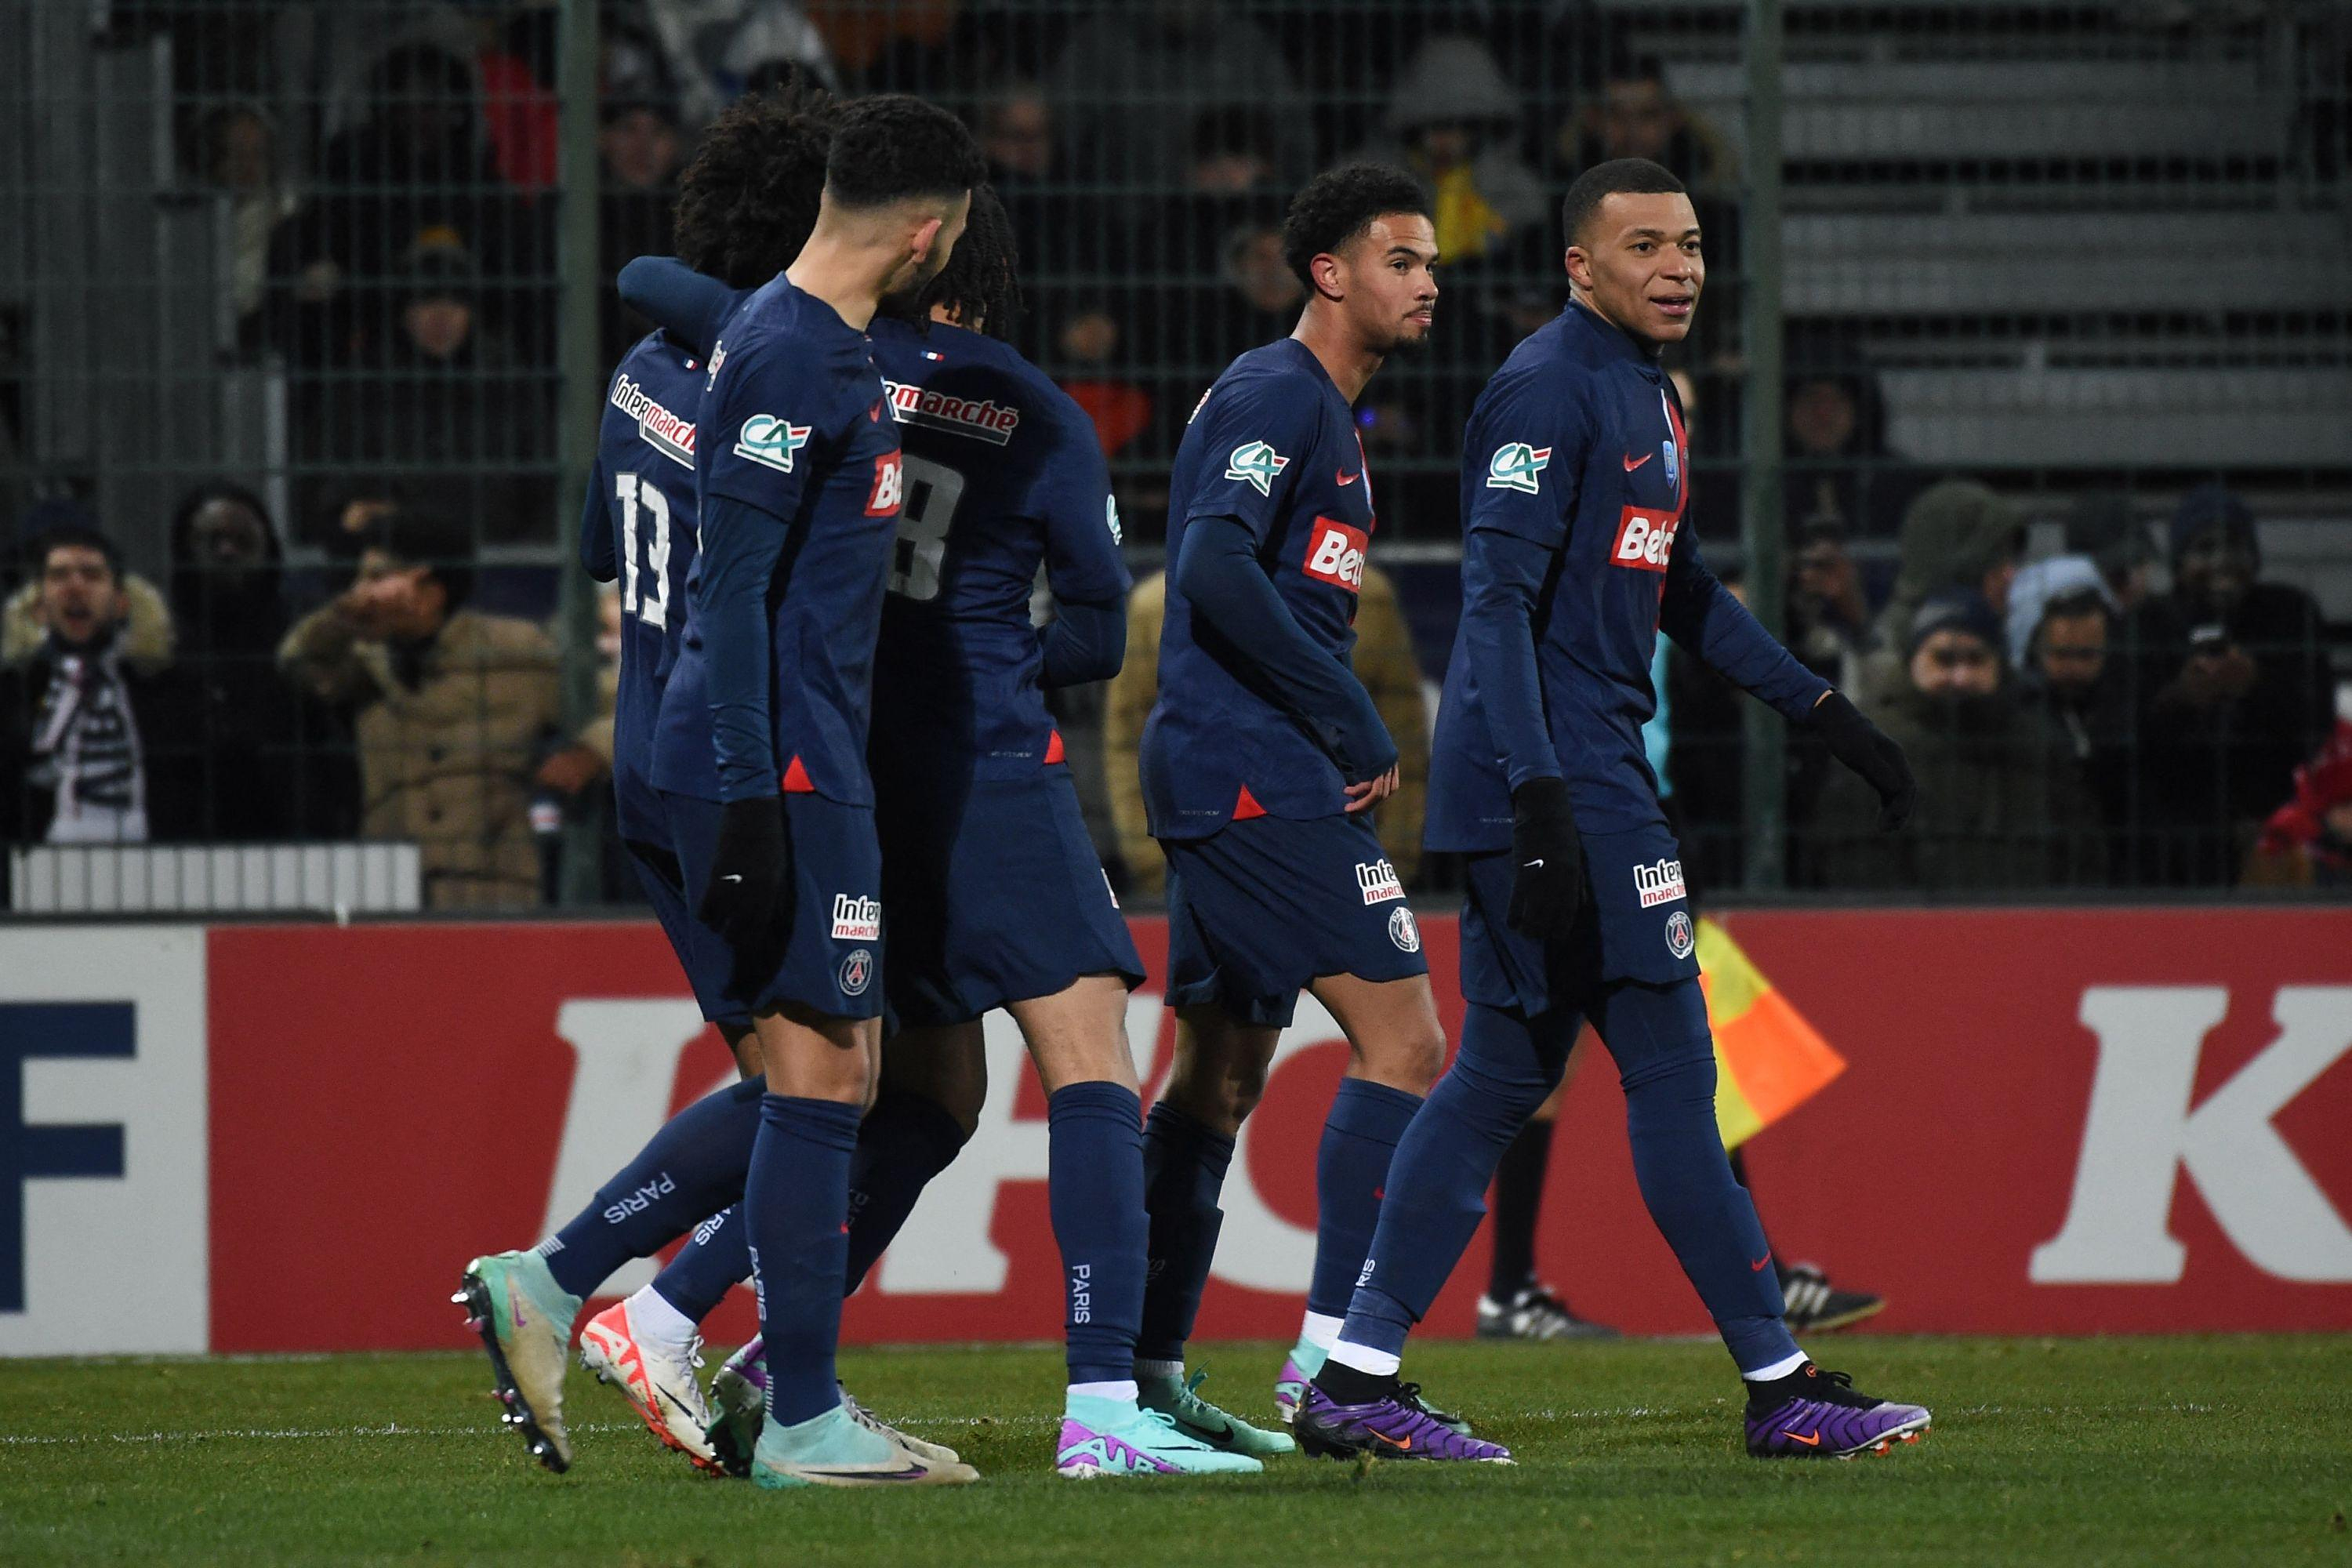 Ligue 1: at what time and on which channel to watch PSG-Brest?